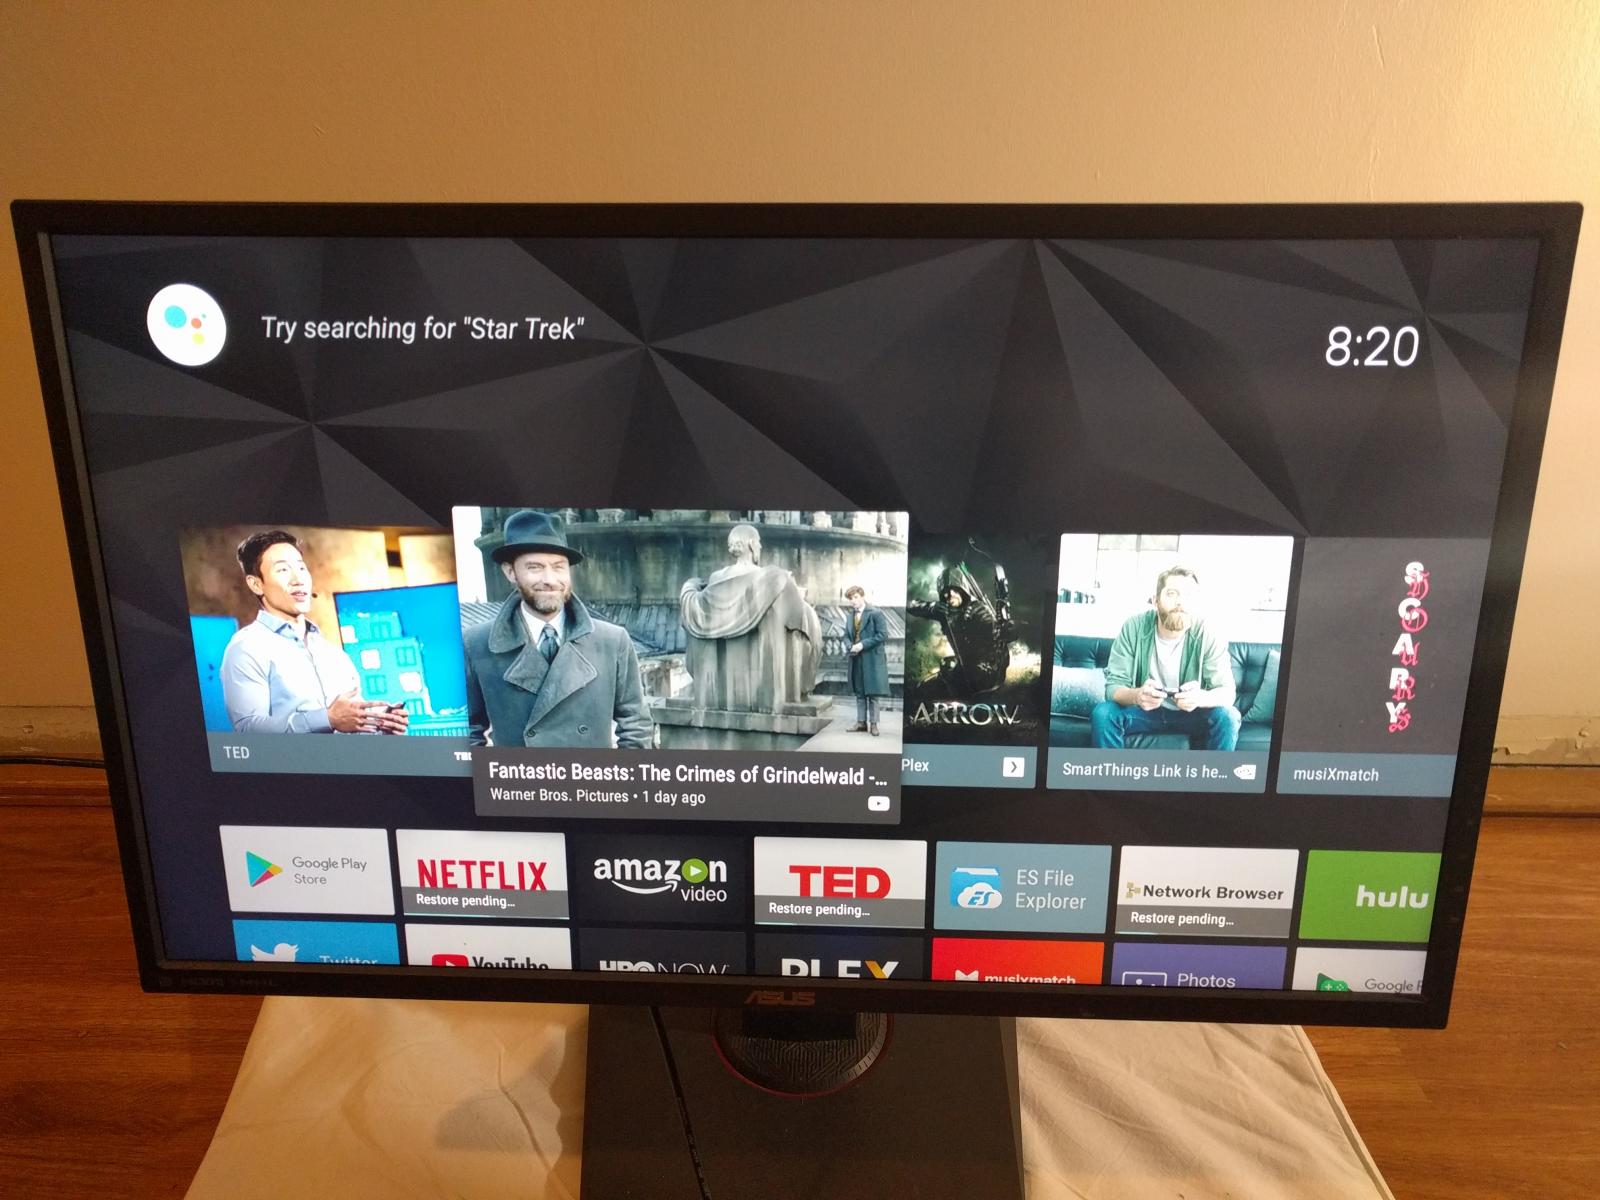 For sale NVIDIA Shield TV (2017) Android TV w/ Remote and Controller